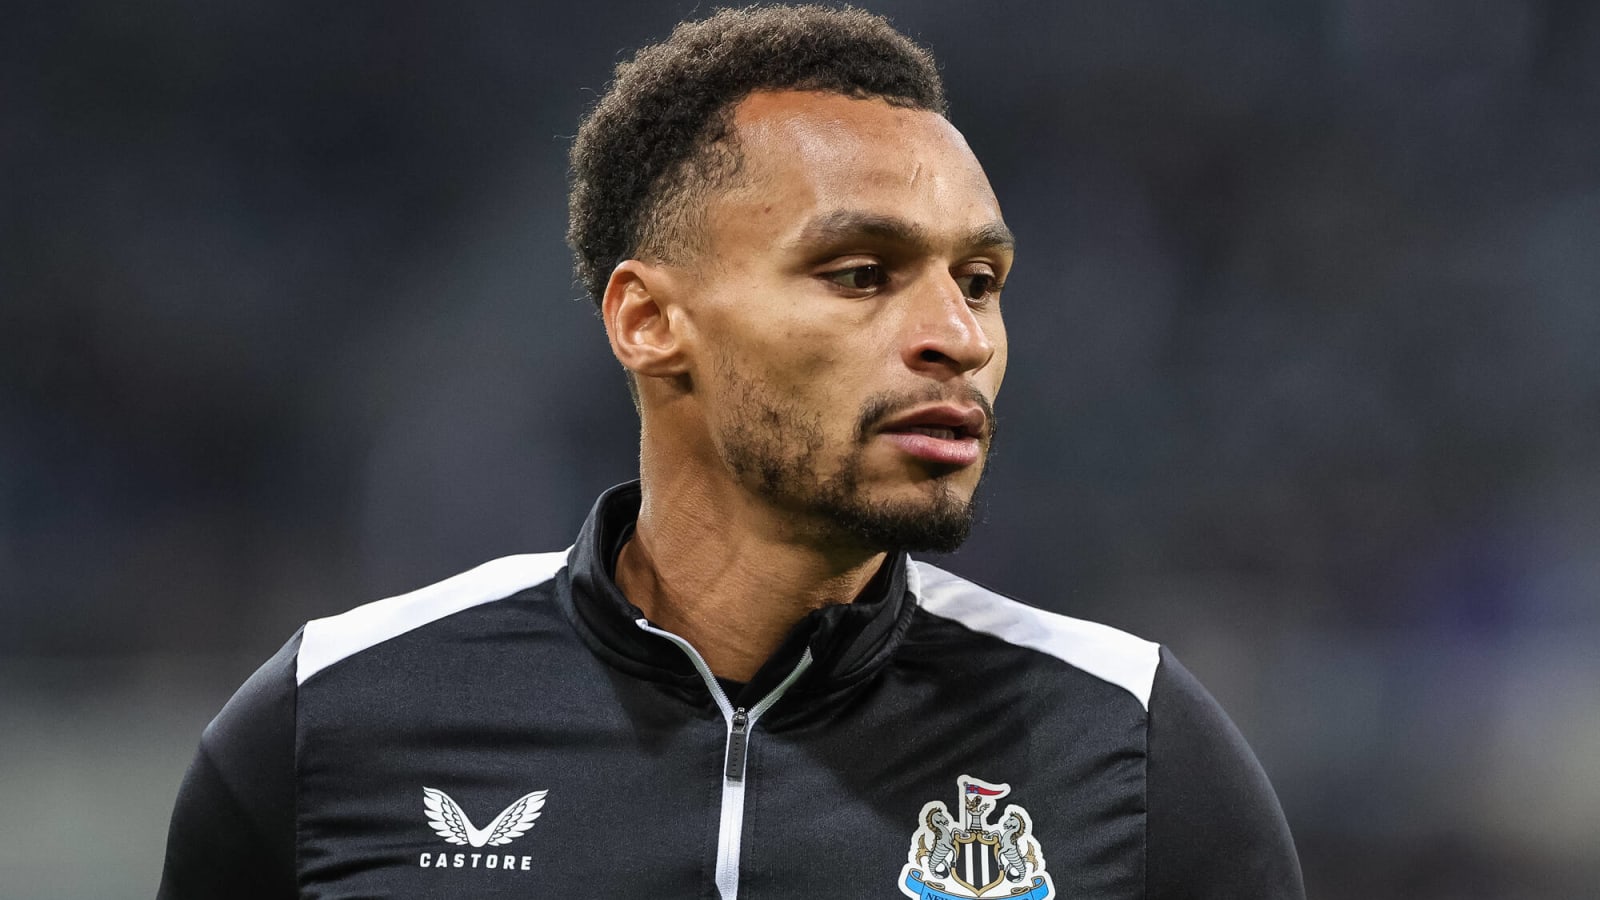 Newcastle open to selling their winger in £25m deal